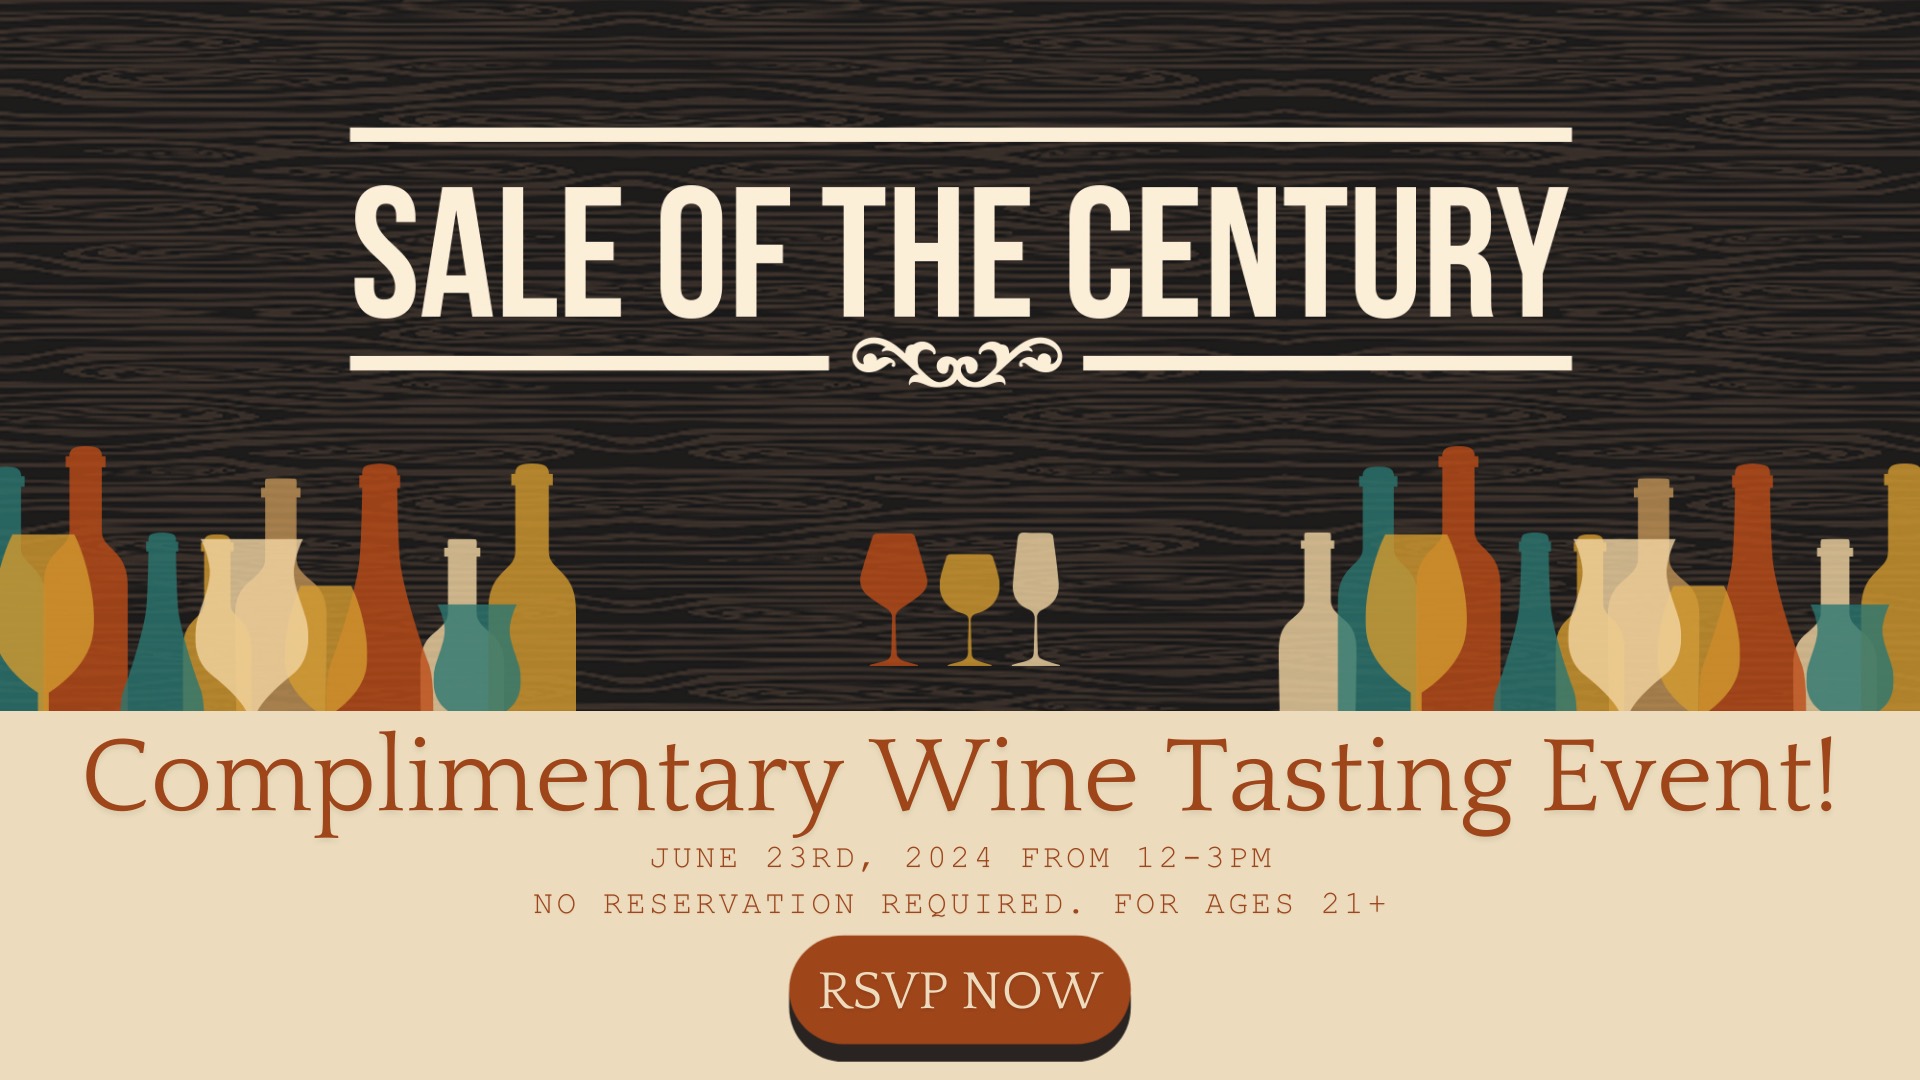 Sale of the Century / Complimentary Wine Tasting Event